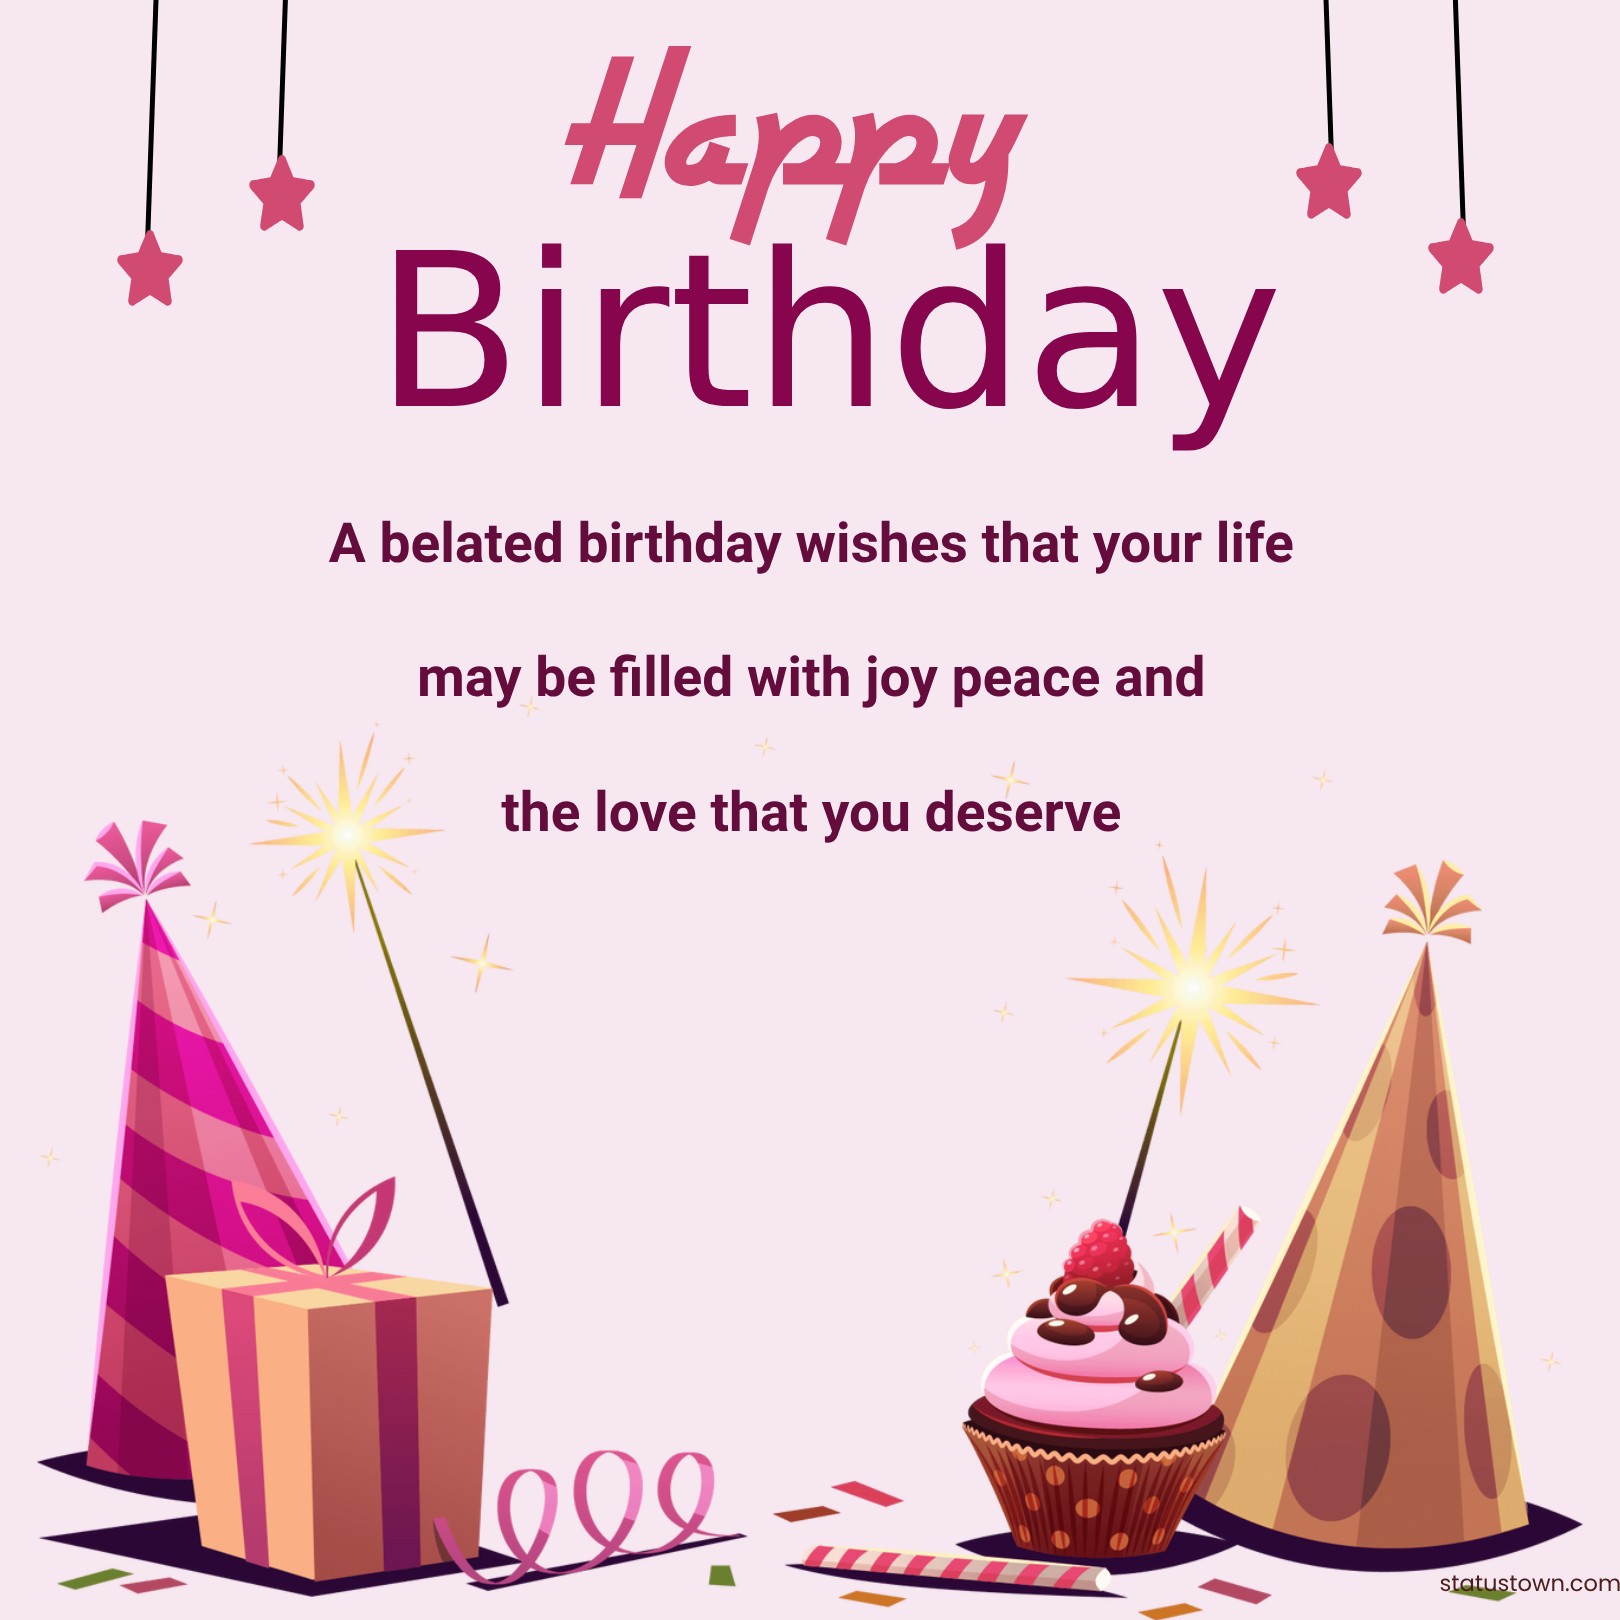 A belated birthday wishes that your life may be filled with joy, peace and the love that you deserve. - Belated Birthday Wishes